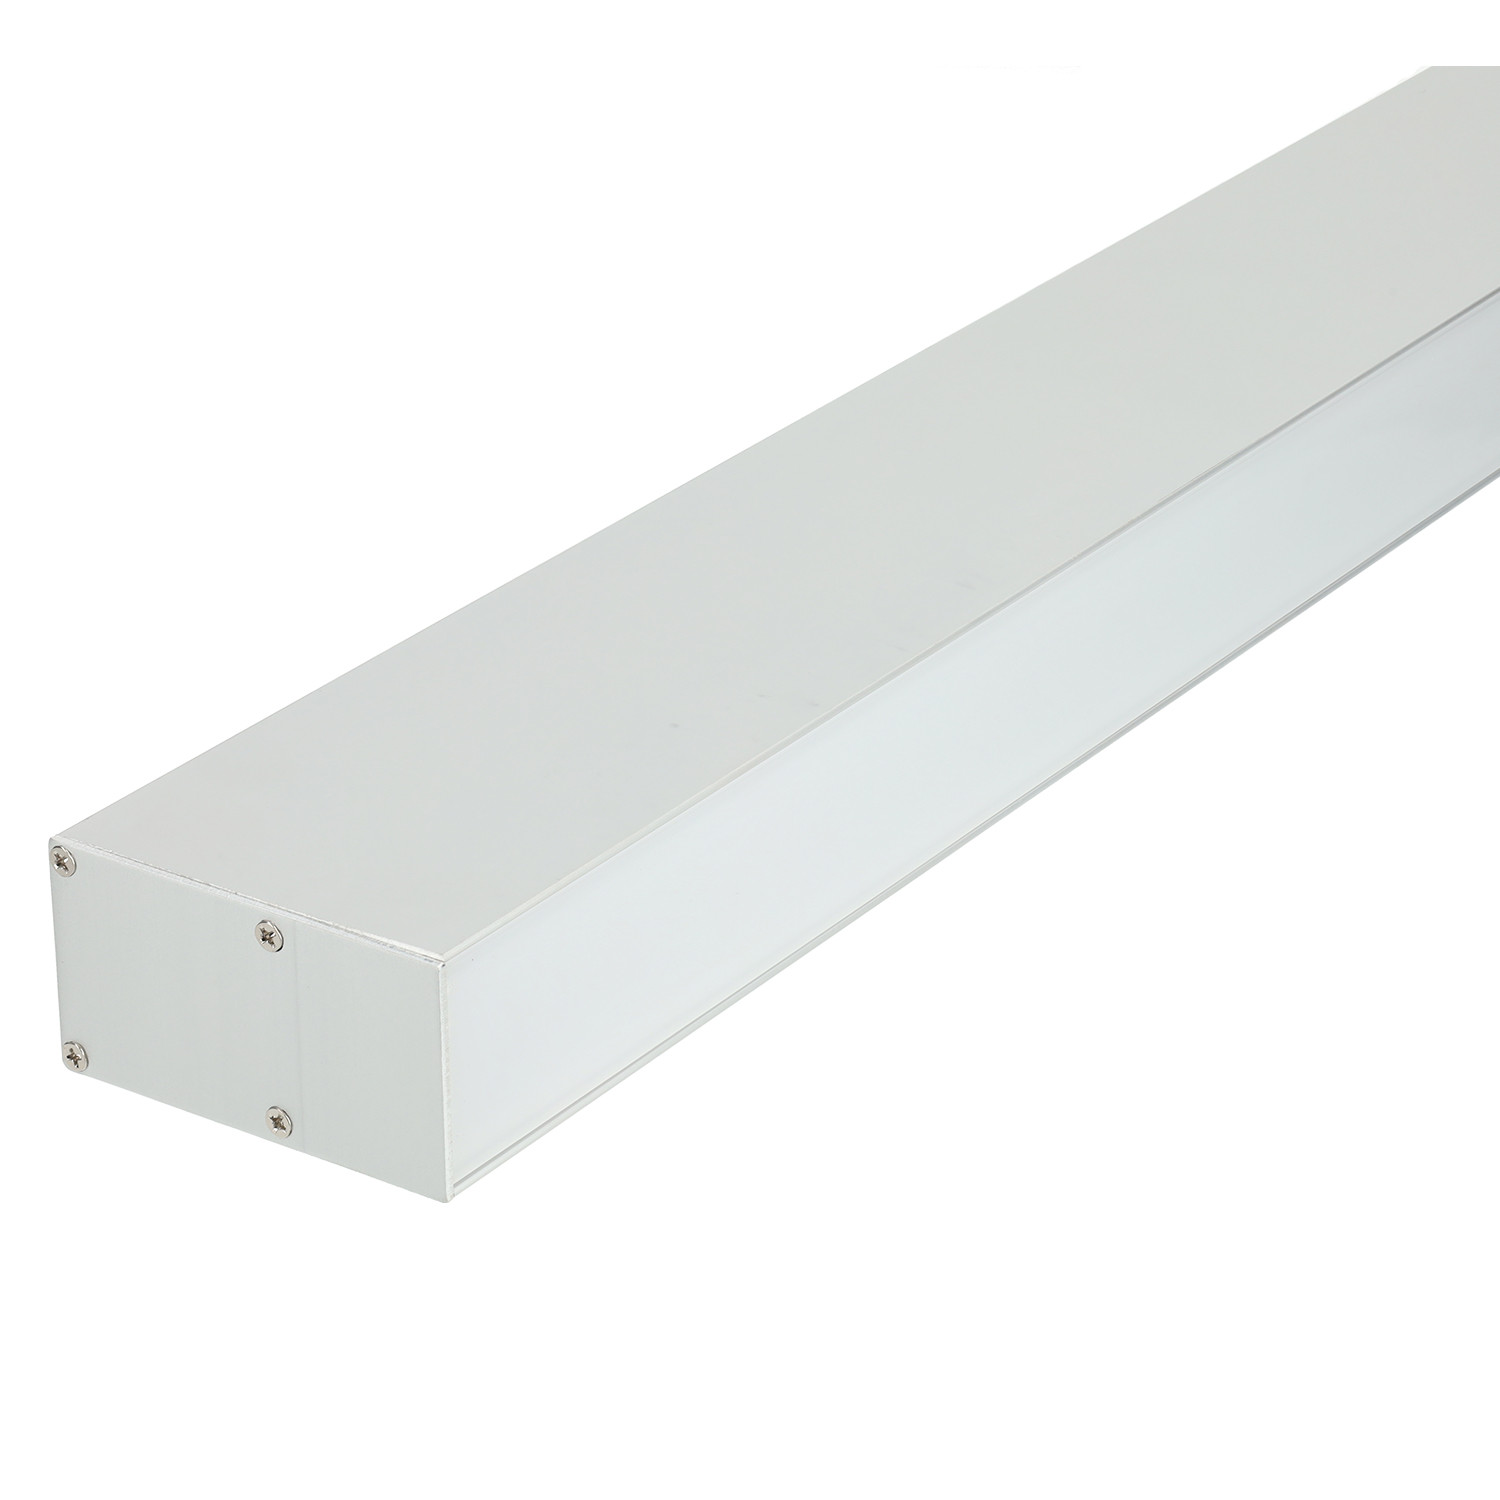 Profile for LED Strips -...